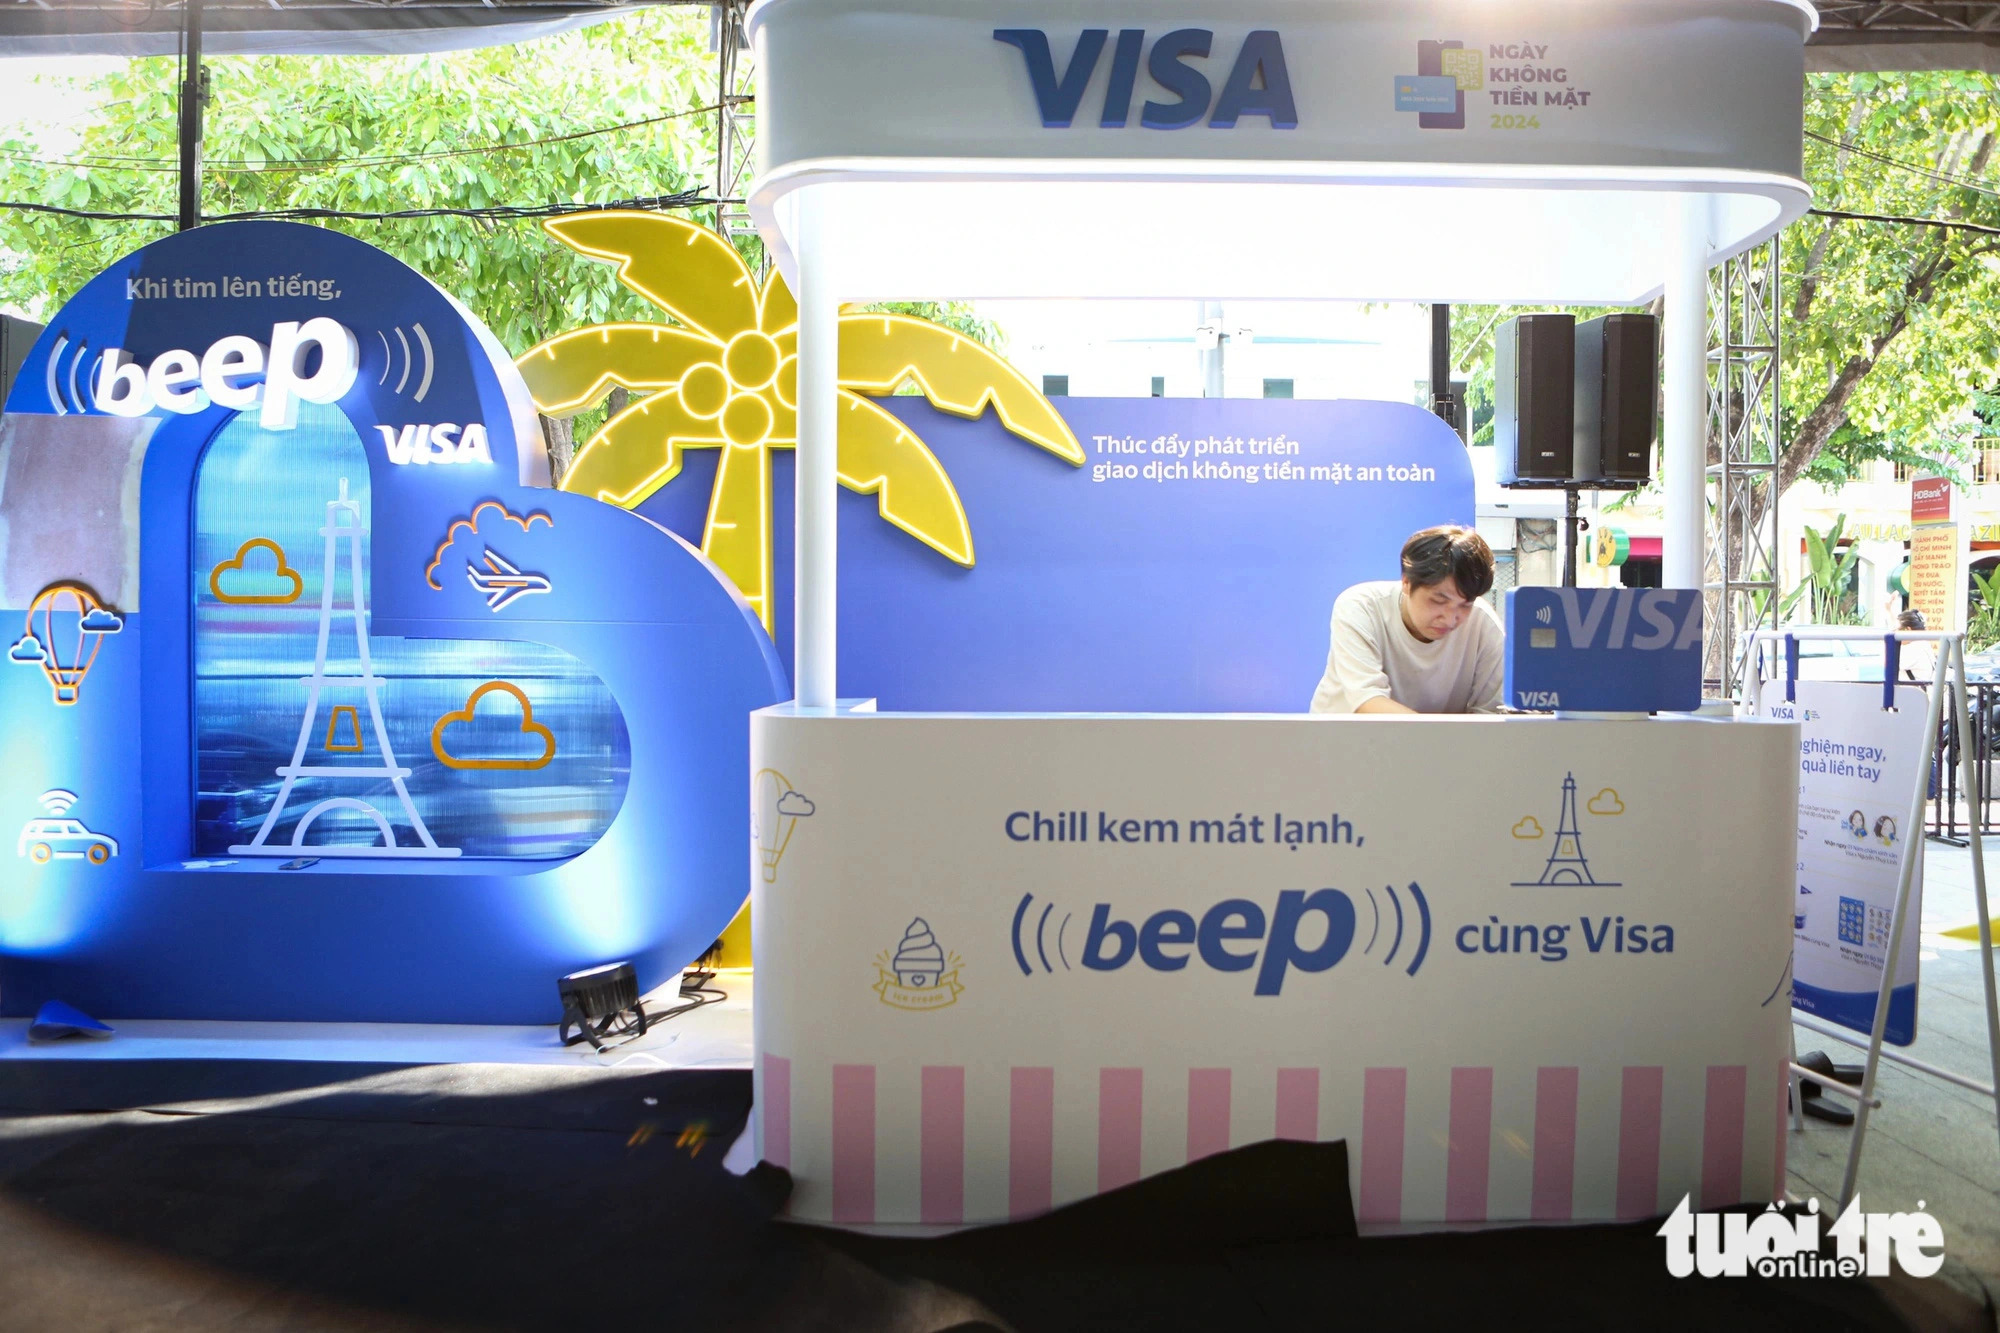 The booth of VISA,  a major global card payment organization, at the Cashless Day Festival held  from June 14 to 16 on Nguyen Hue Pedestrian Street in District 1, Ho Chi Minh City. Photo: Phuong Quyen / Tuoi Tre